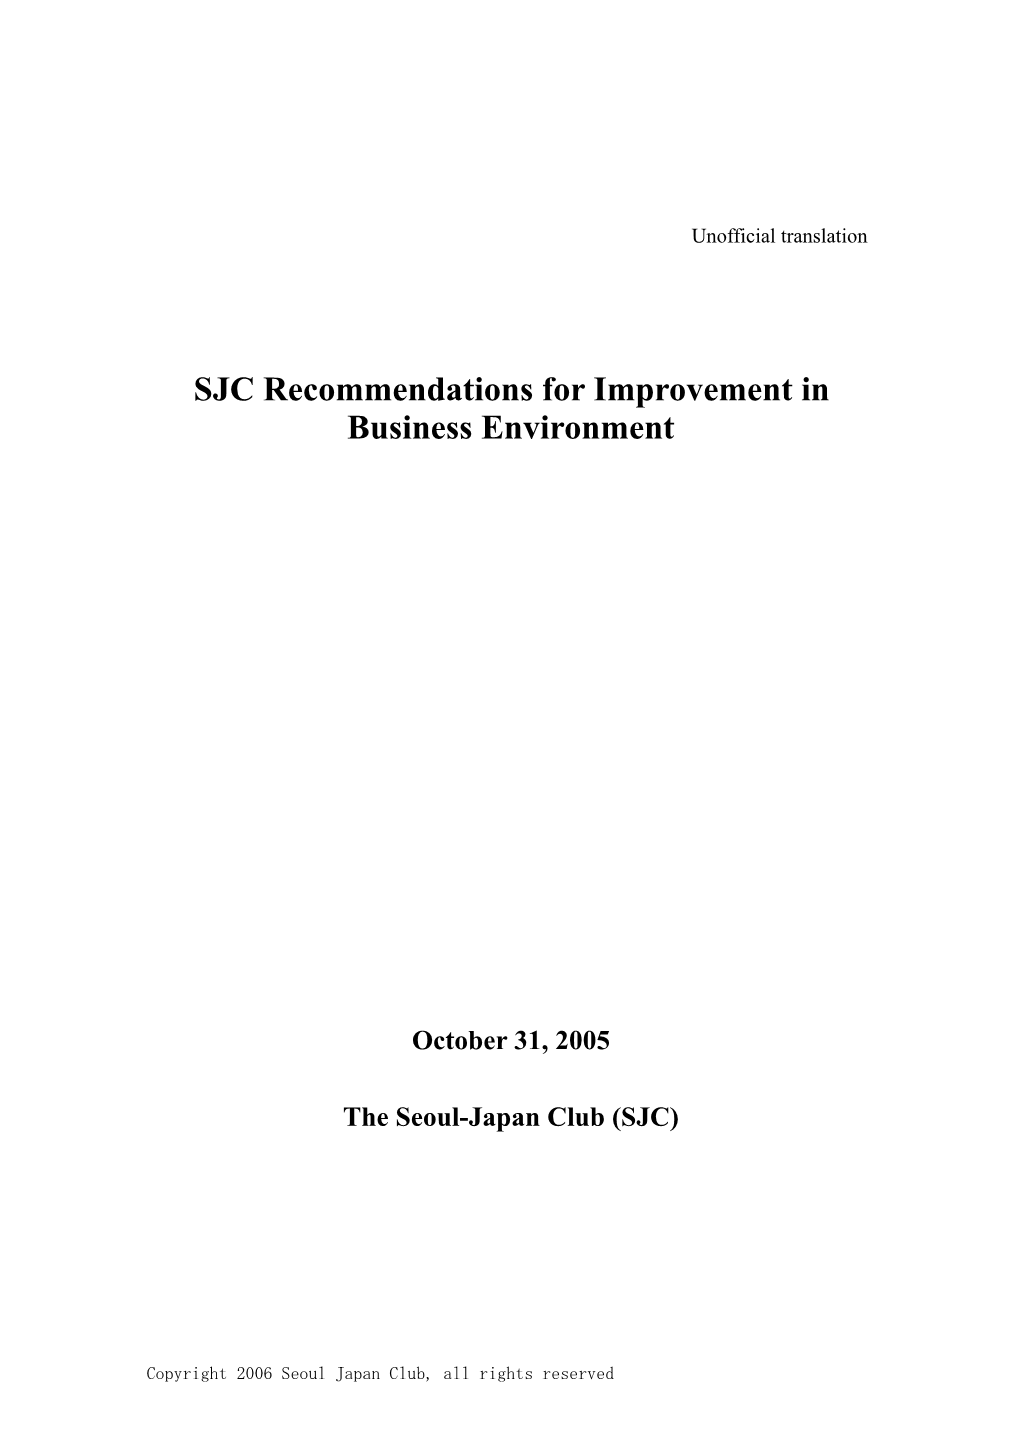 SJC Recommendations for Improvement in Business Environment